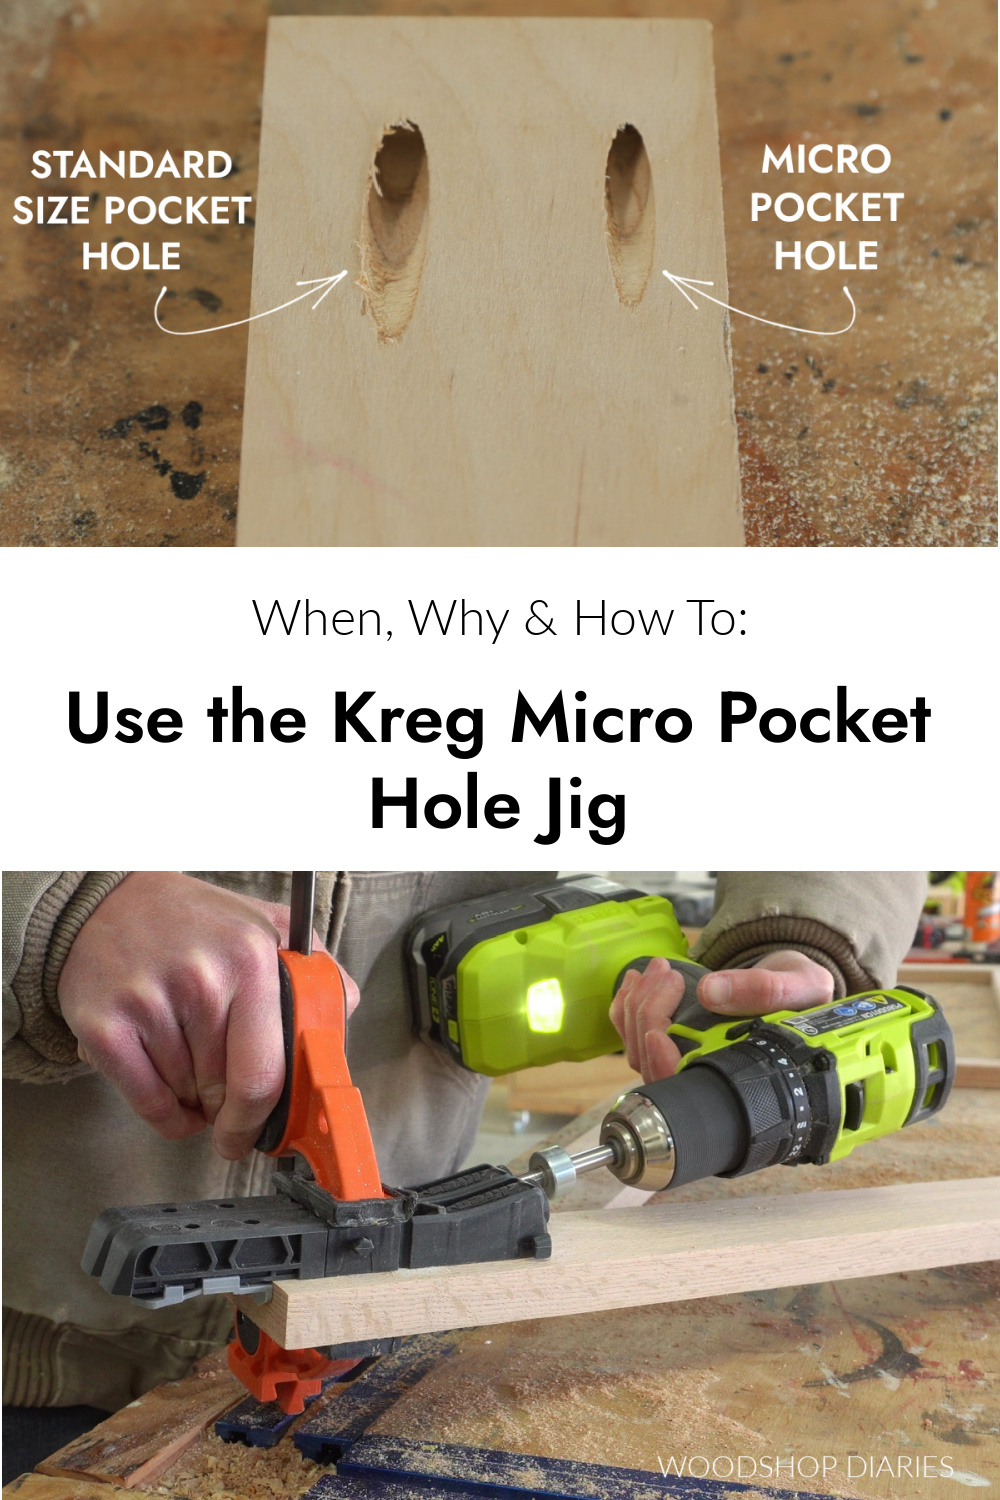 Pinterest collage image showing different size pocket holes at top and Shara Woodshop Diaries drilling pocket holes at bottom with text "when, why, and how to use the Kreg Micro Pocket Hole Jig"